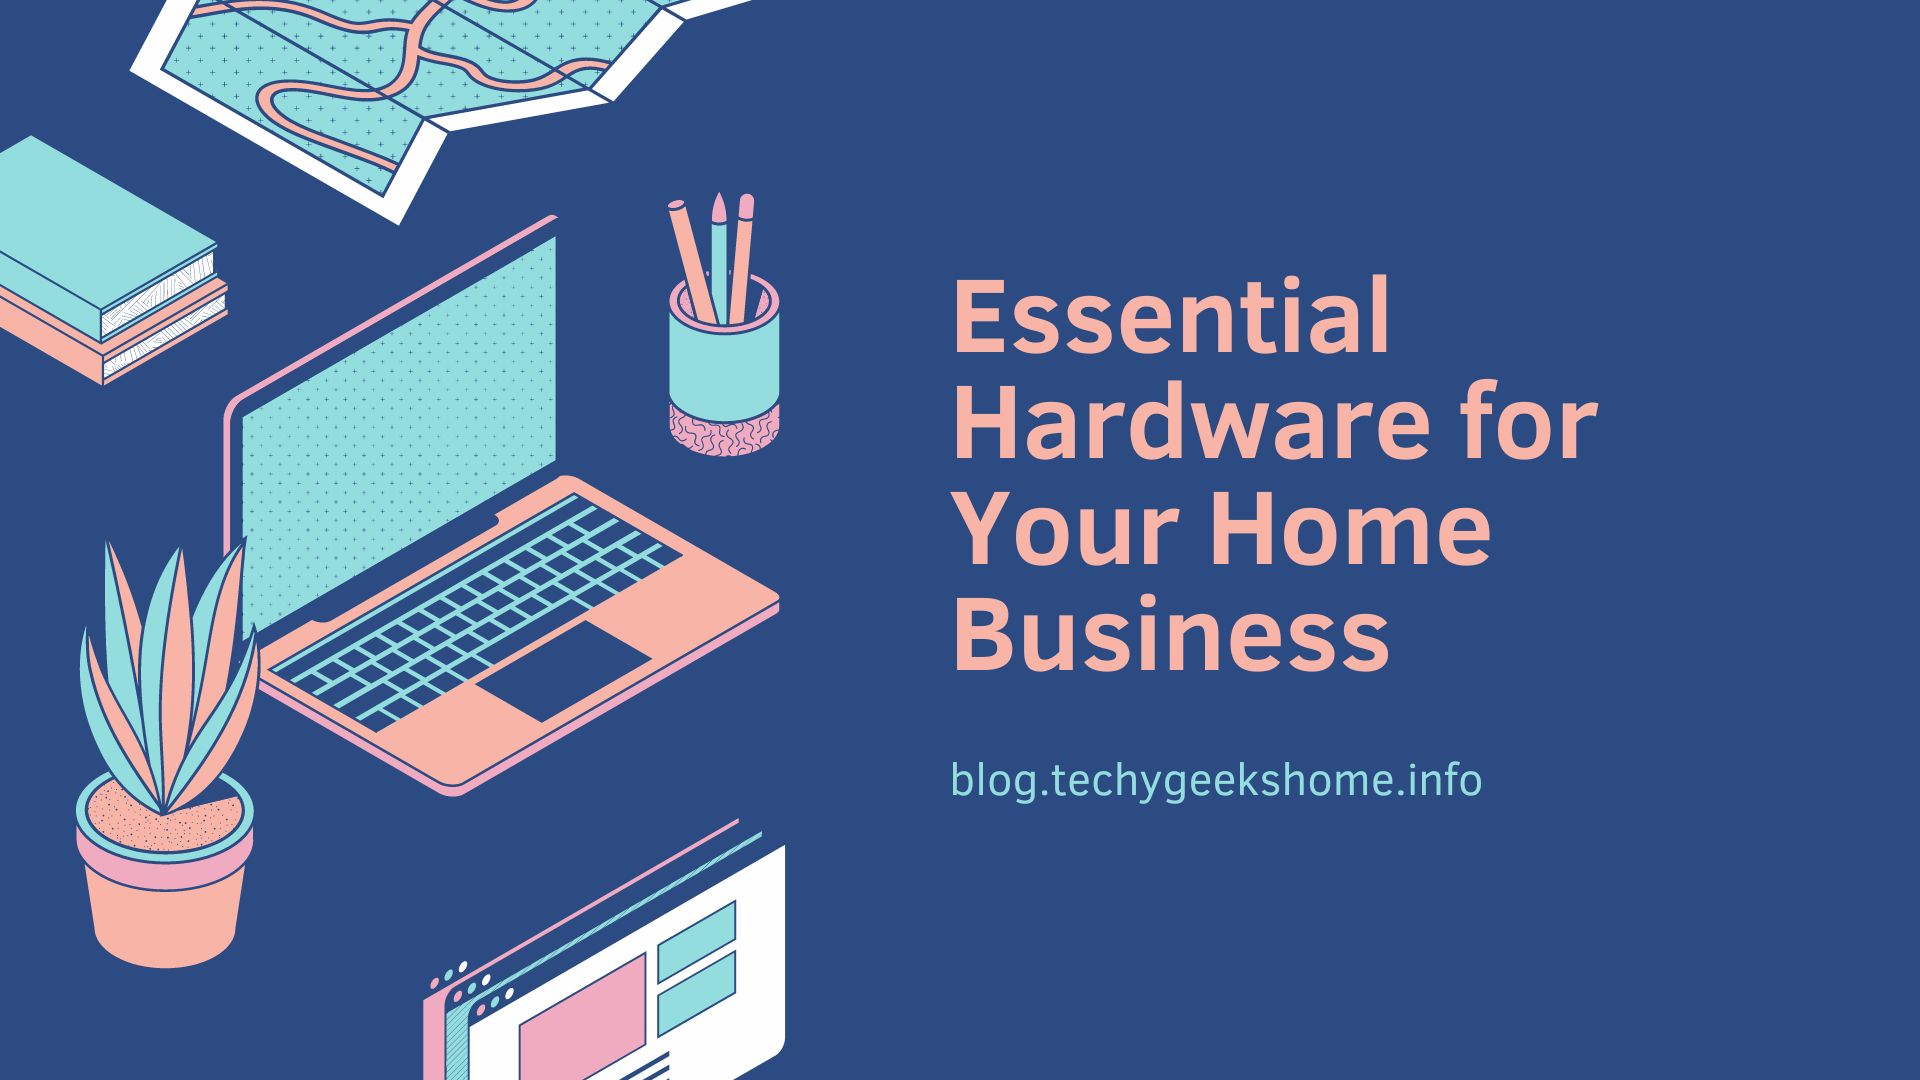 Essential Hardware for Your Home Business 2